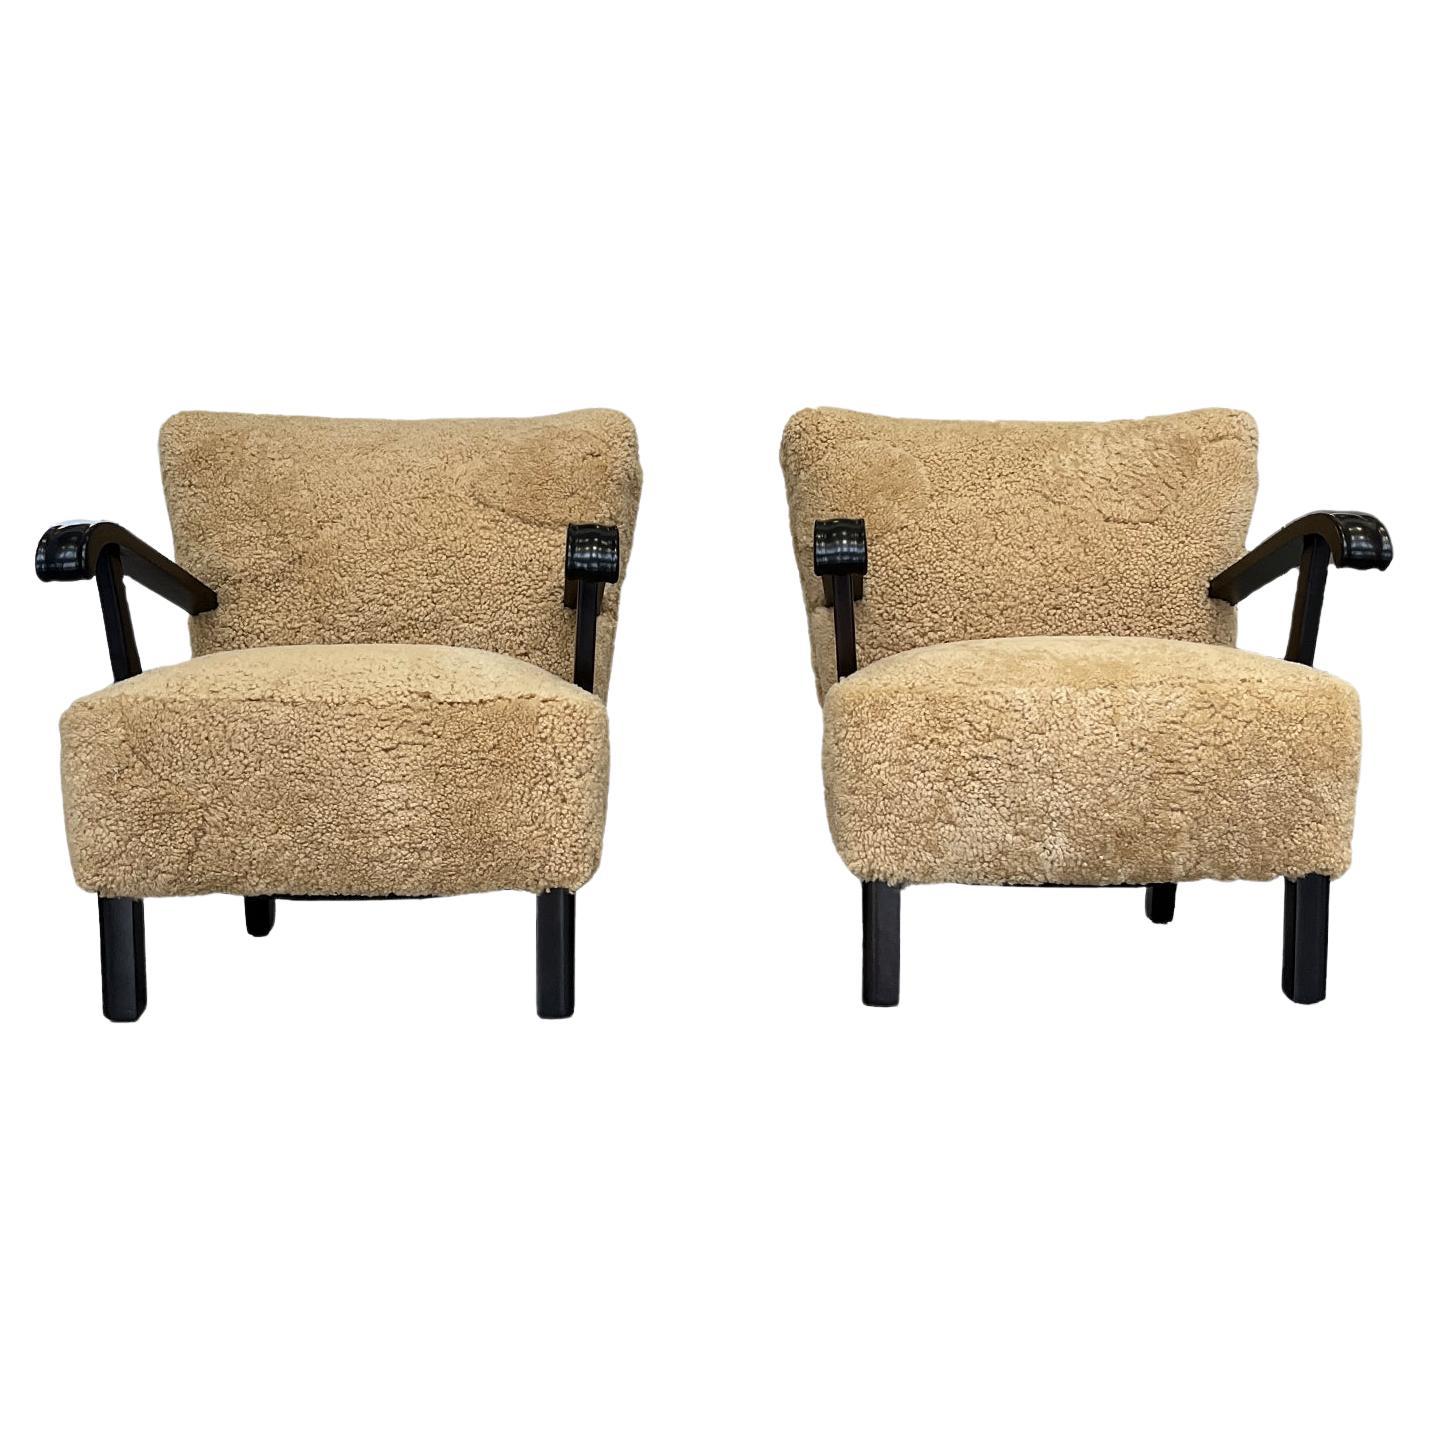 Pair of Mahogany and Shearling Armchairs by Alfred Christensen For Sale